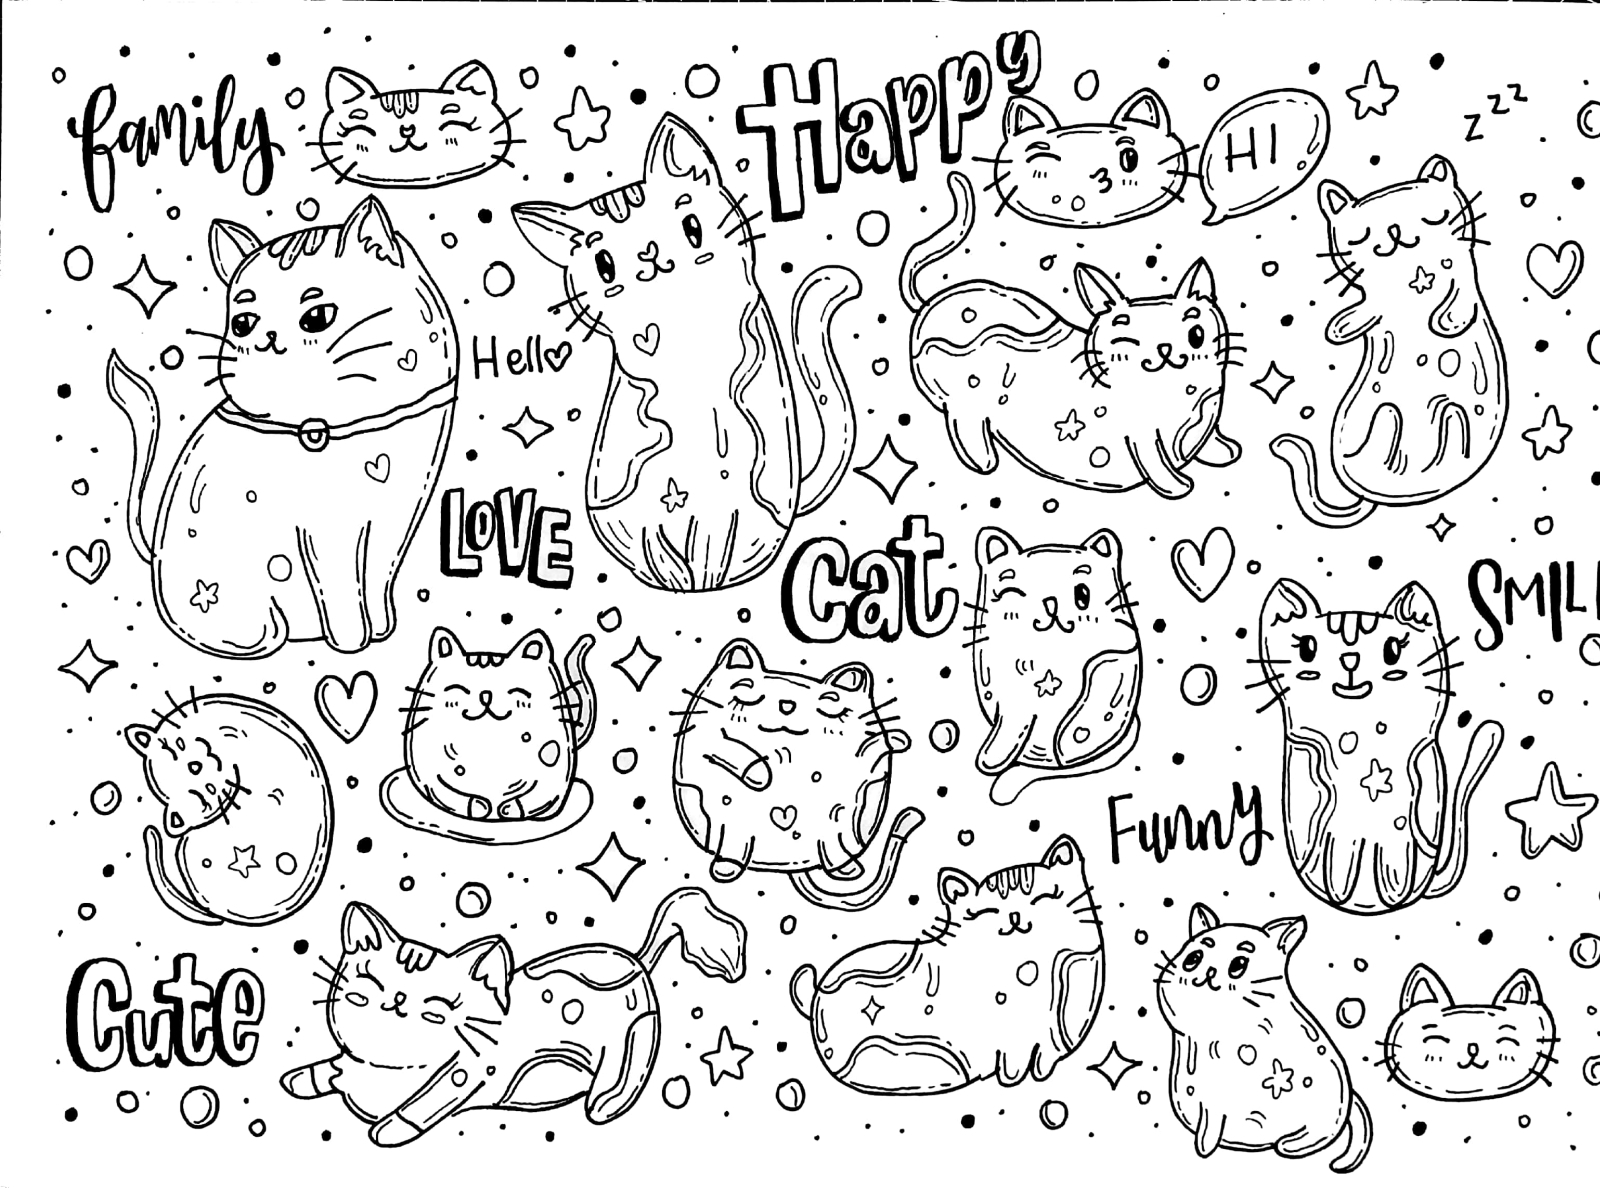 Cat Doodle Vector Set by Monograph and Craft on Dribbble